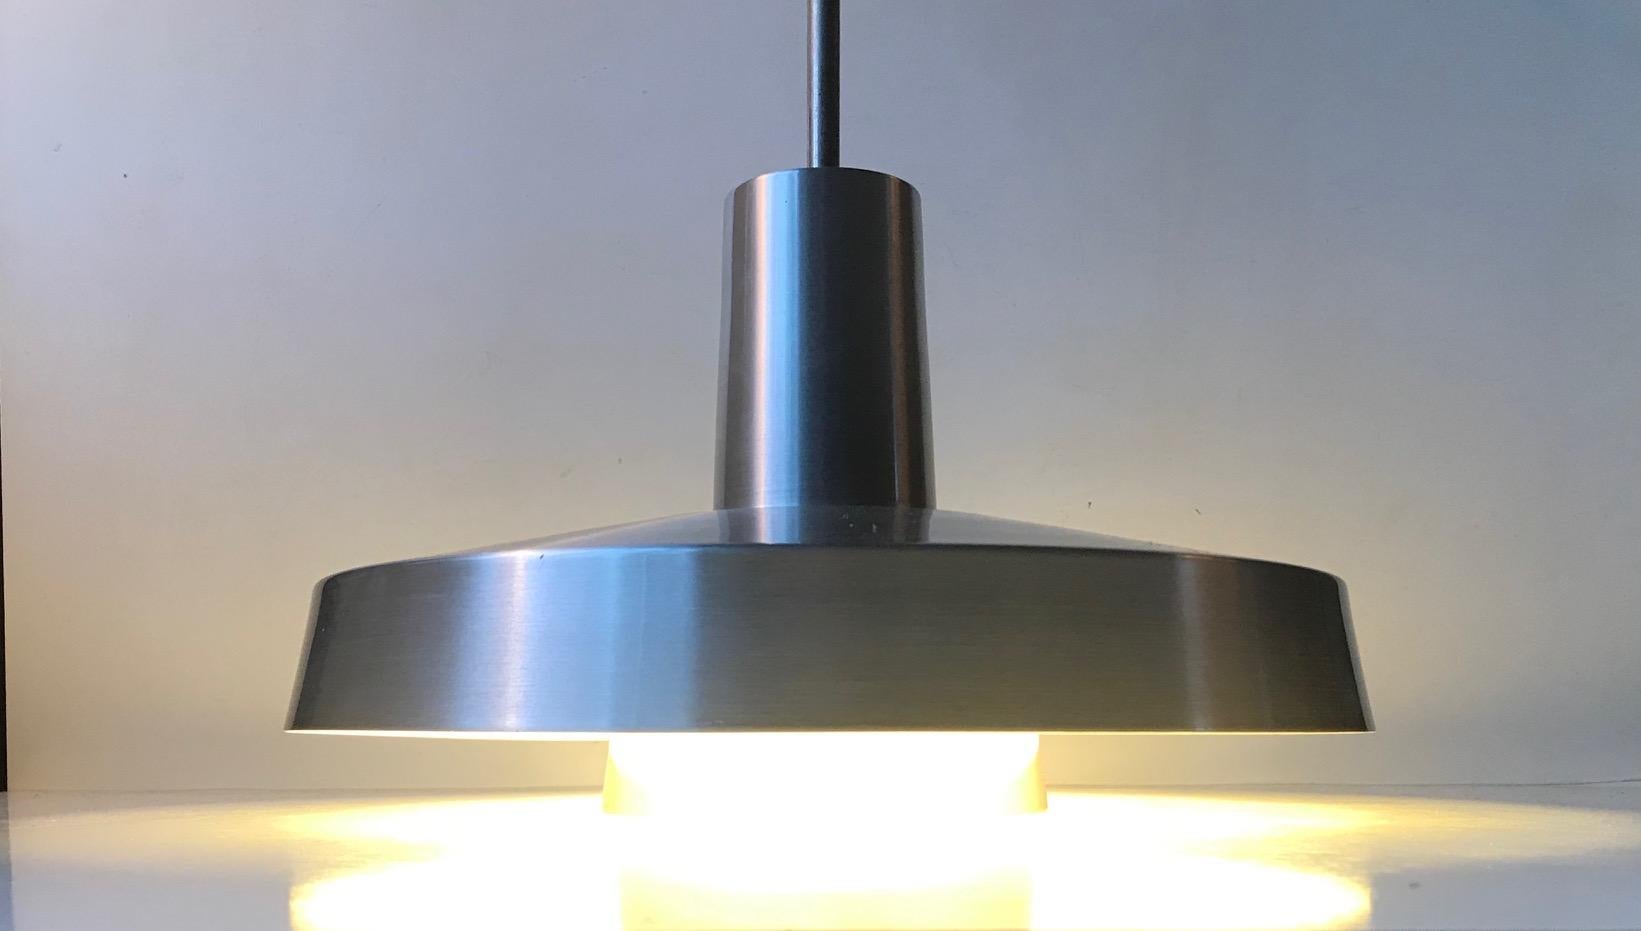 A rare brushed aluminium pendant light from Lyfa in Denmark. It is called Top 2 and was designed in 1972 by husband and wife Eva & Niels Koppel in collaboration with two other danish designers; Erik Thyring and Gert Edstrand. It suitable for